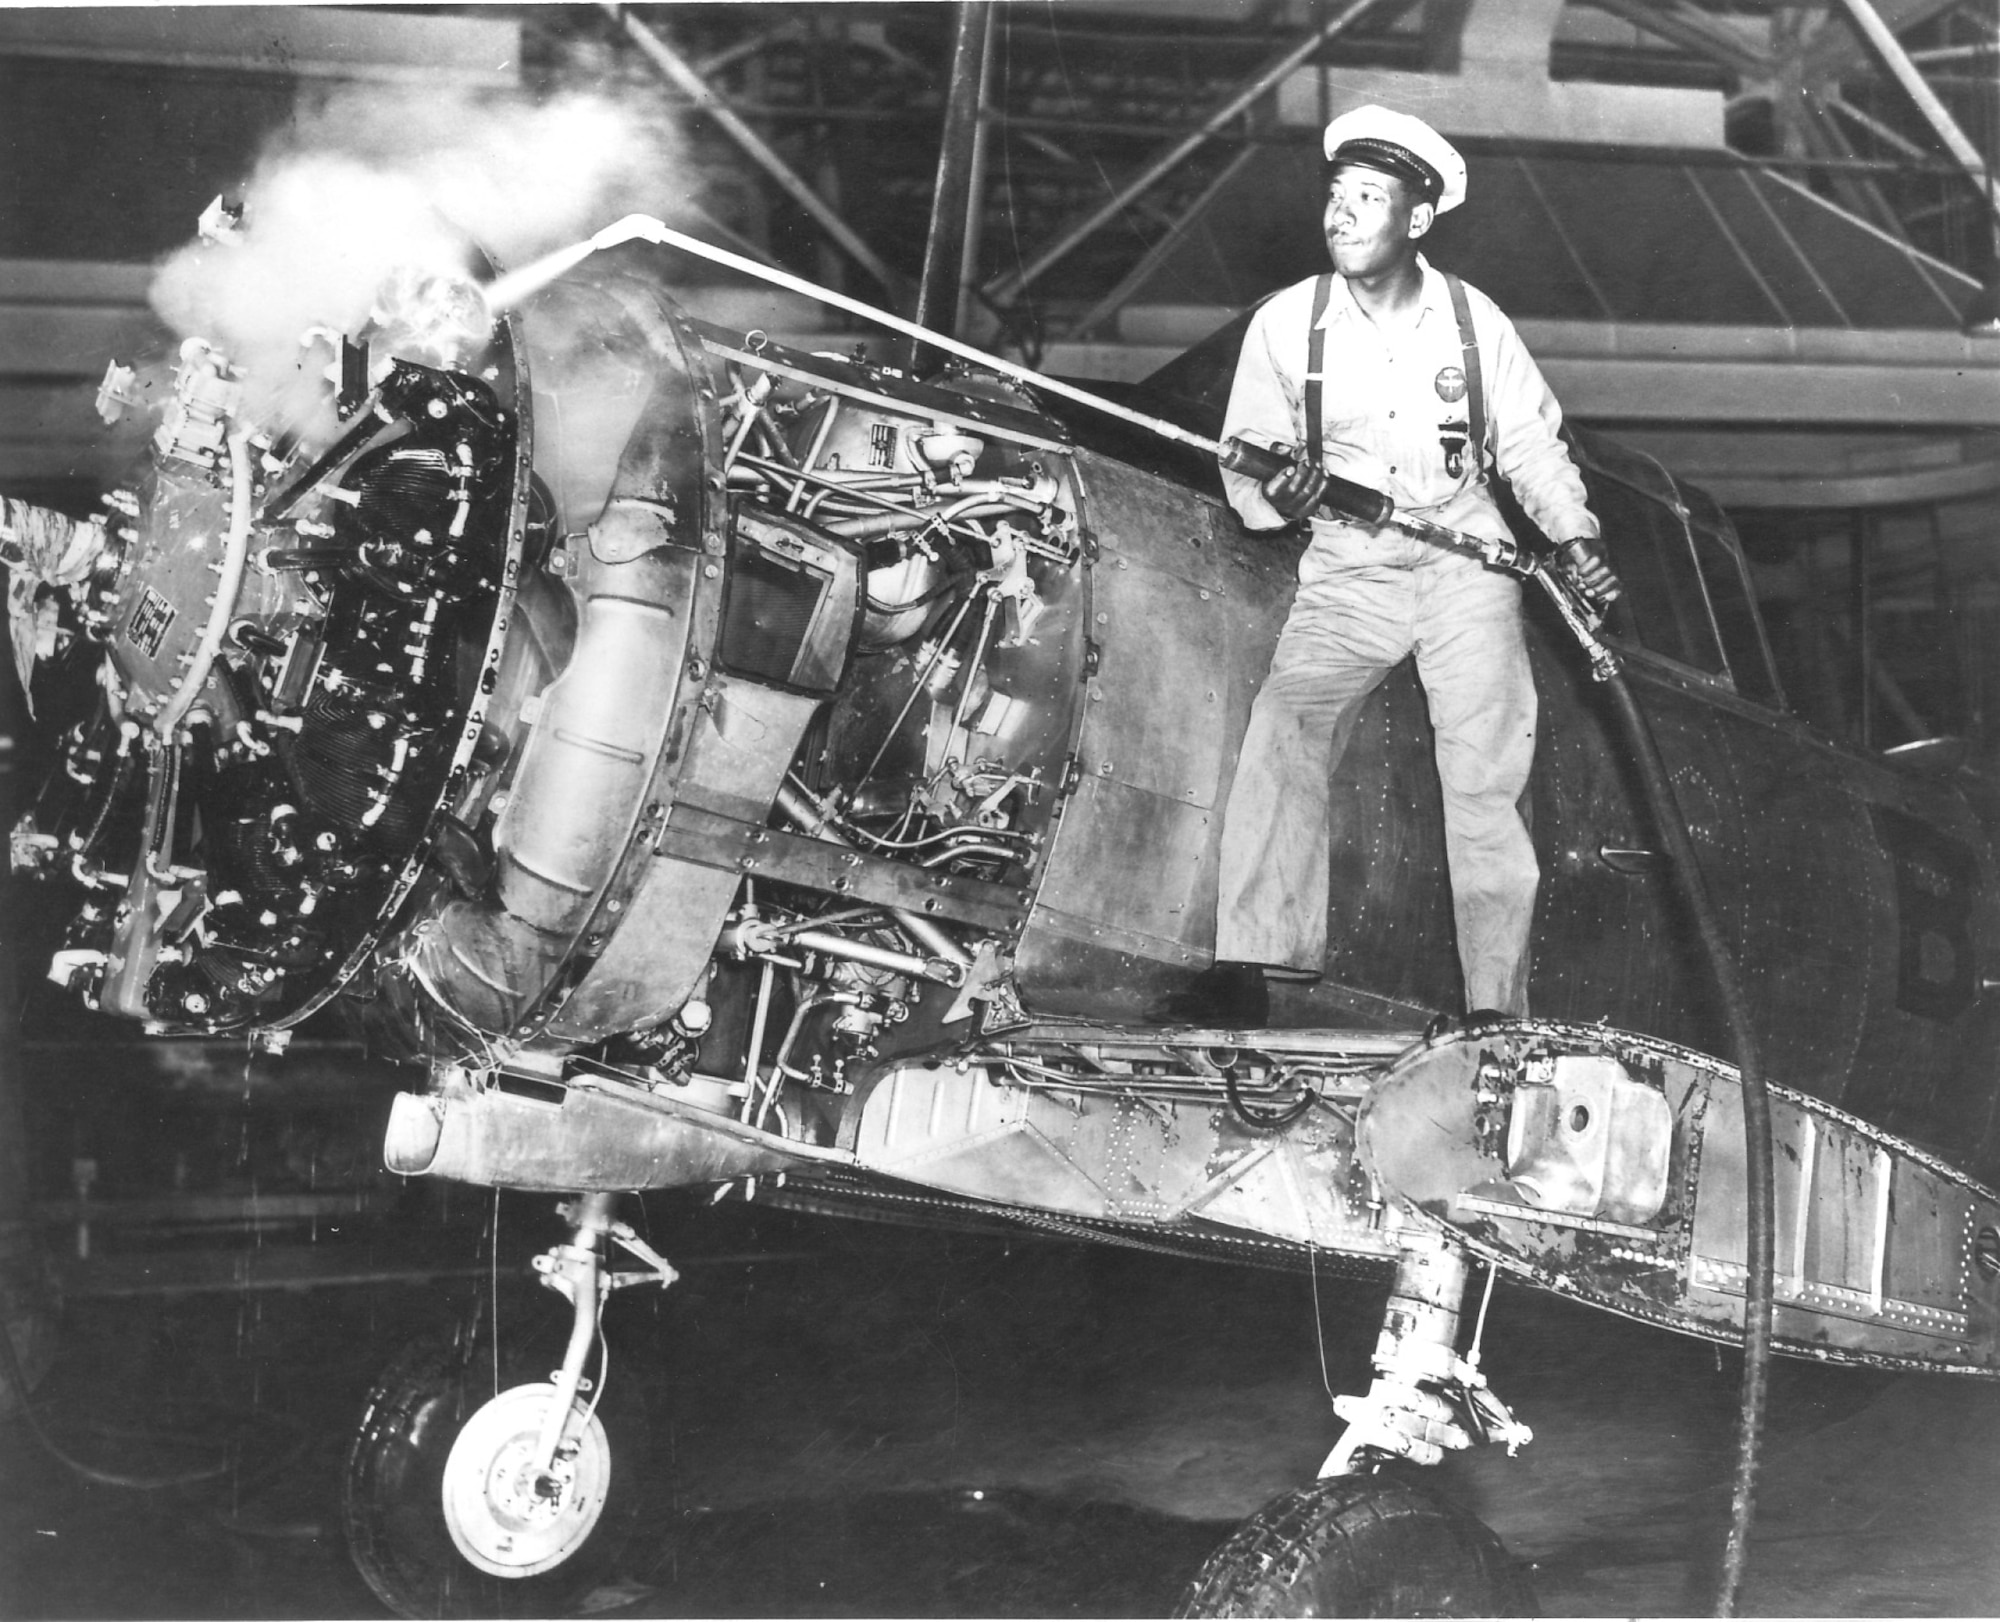 AT-6 engine steam cleaning at Tinker. (Photo courtesy of Tinker History Office)